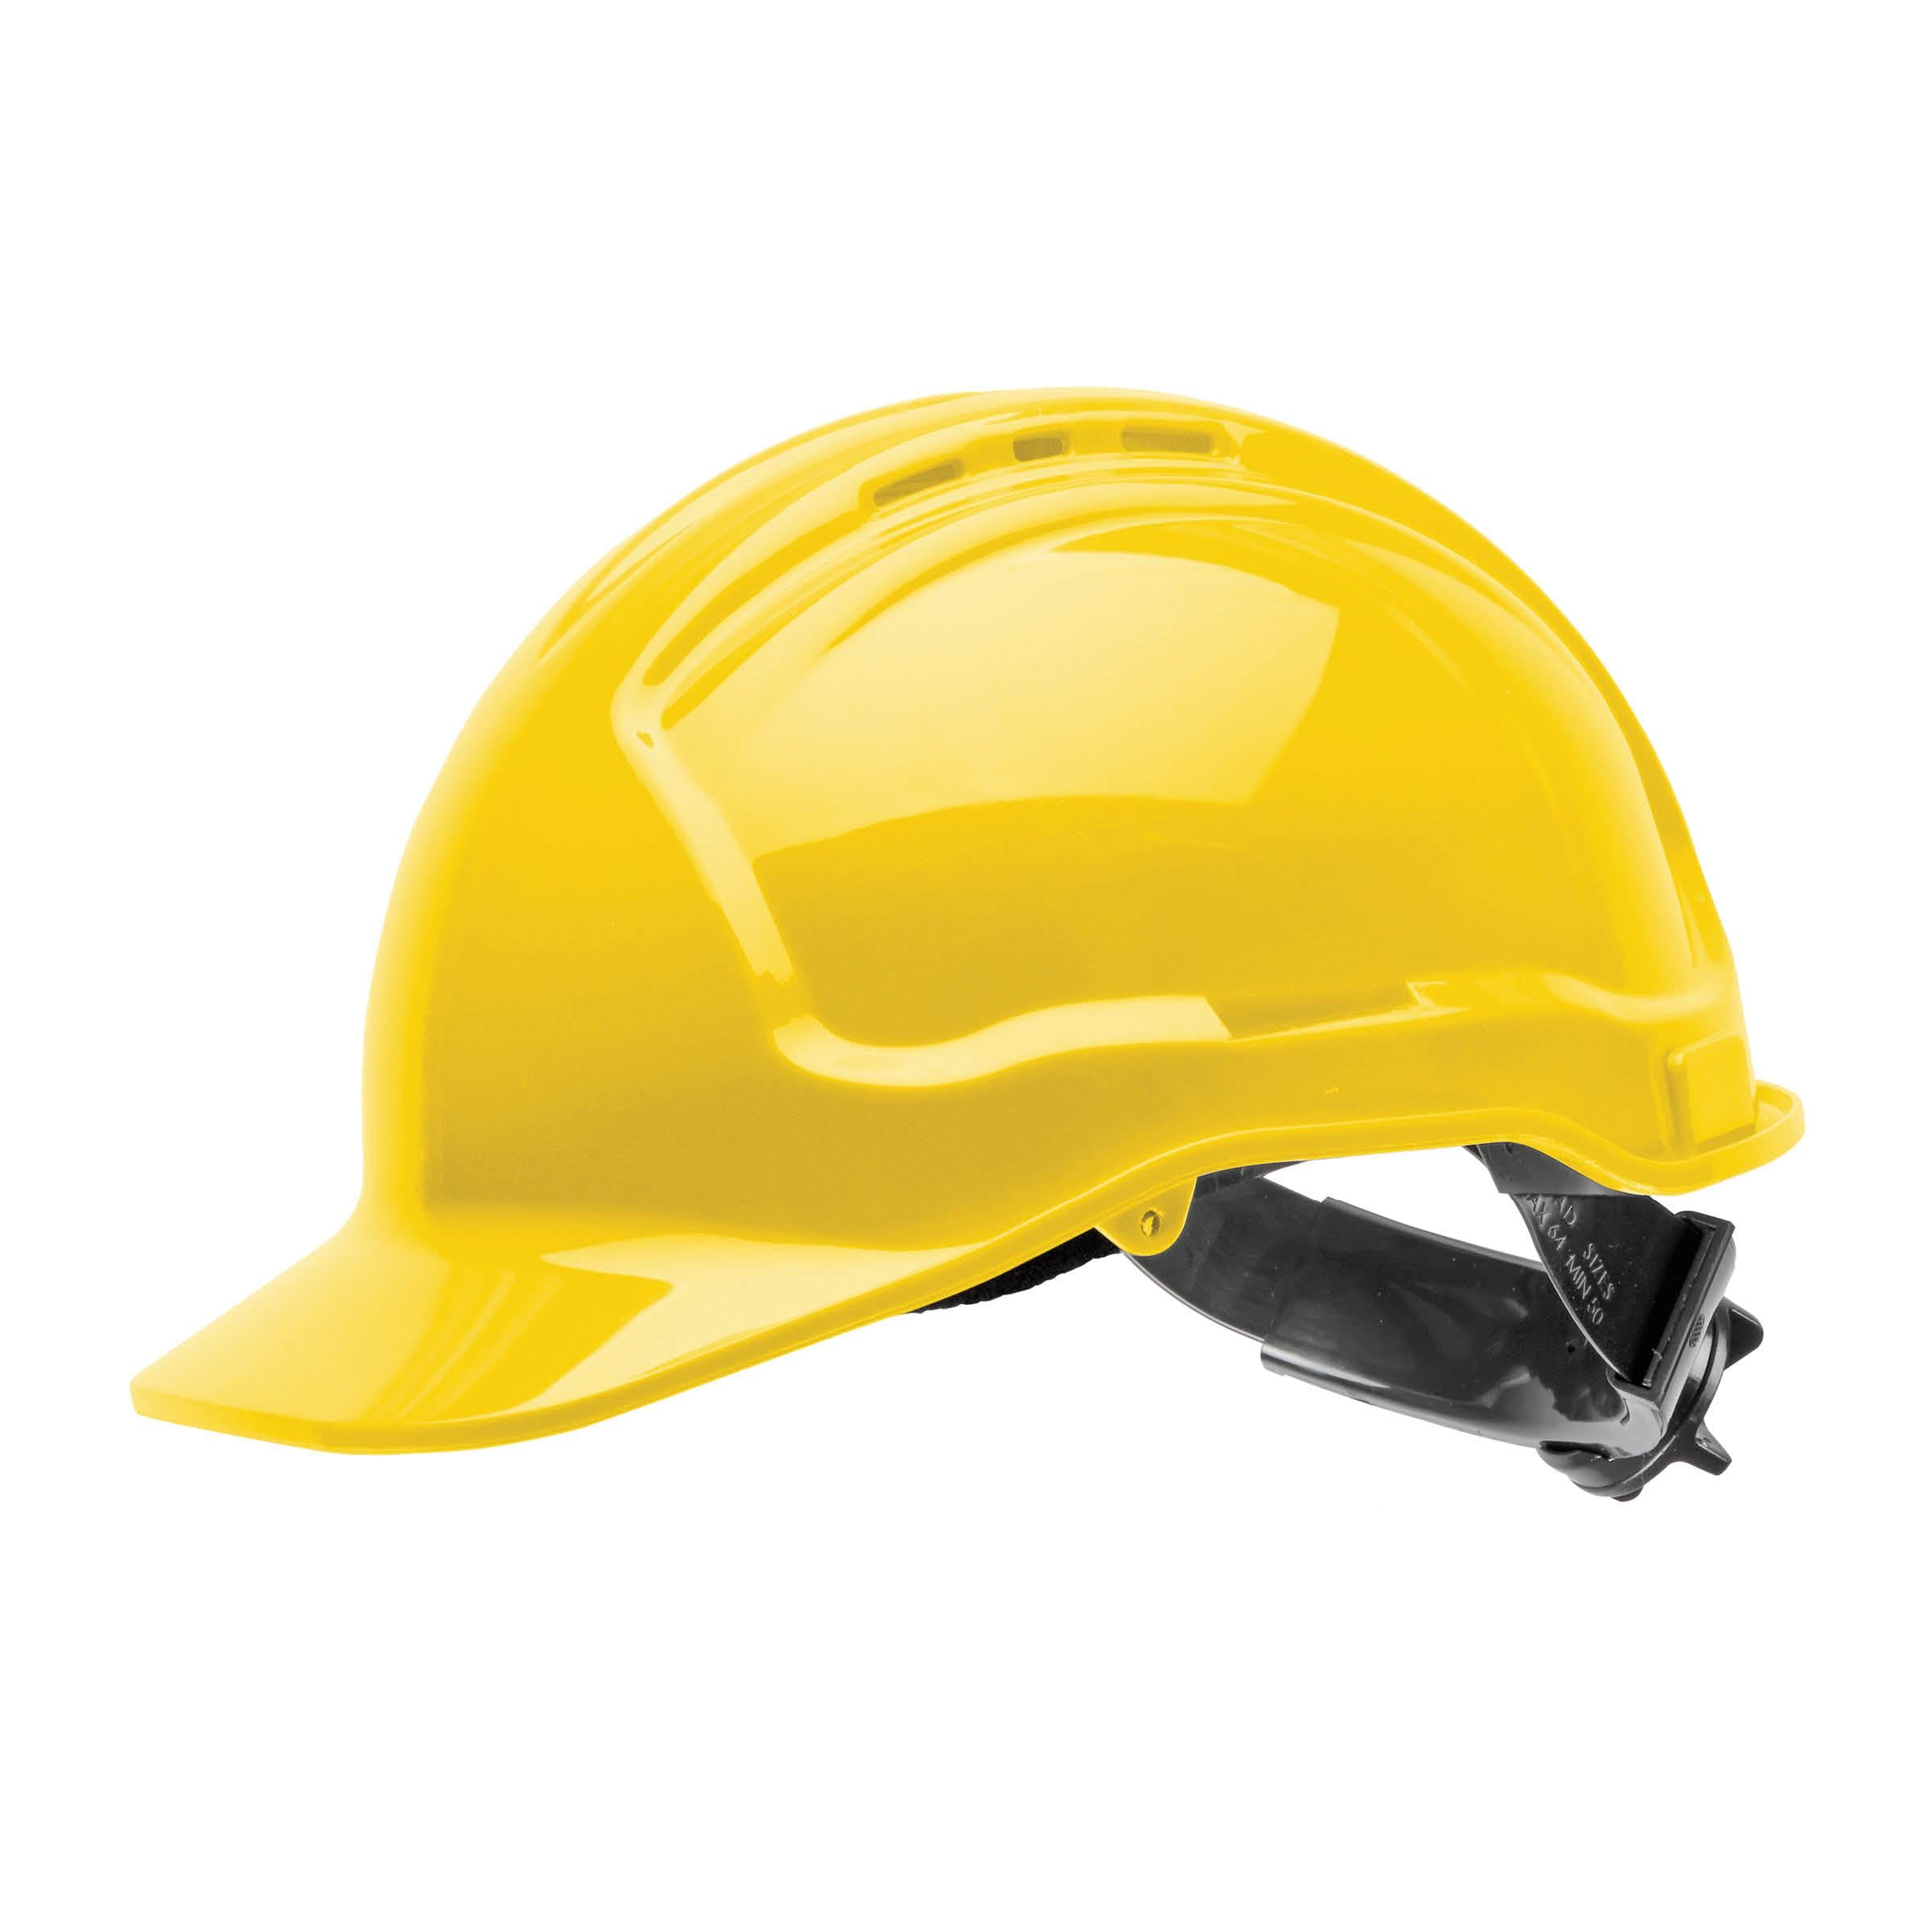 Force 360 HPFPR57R Premium Vented Ratched Hard Hat